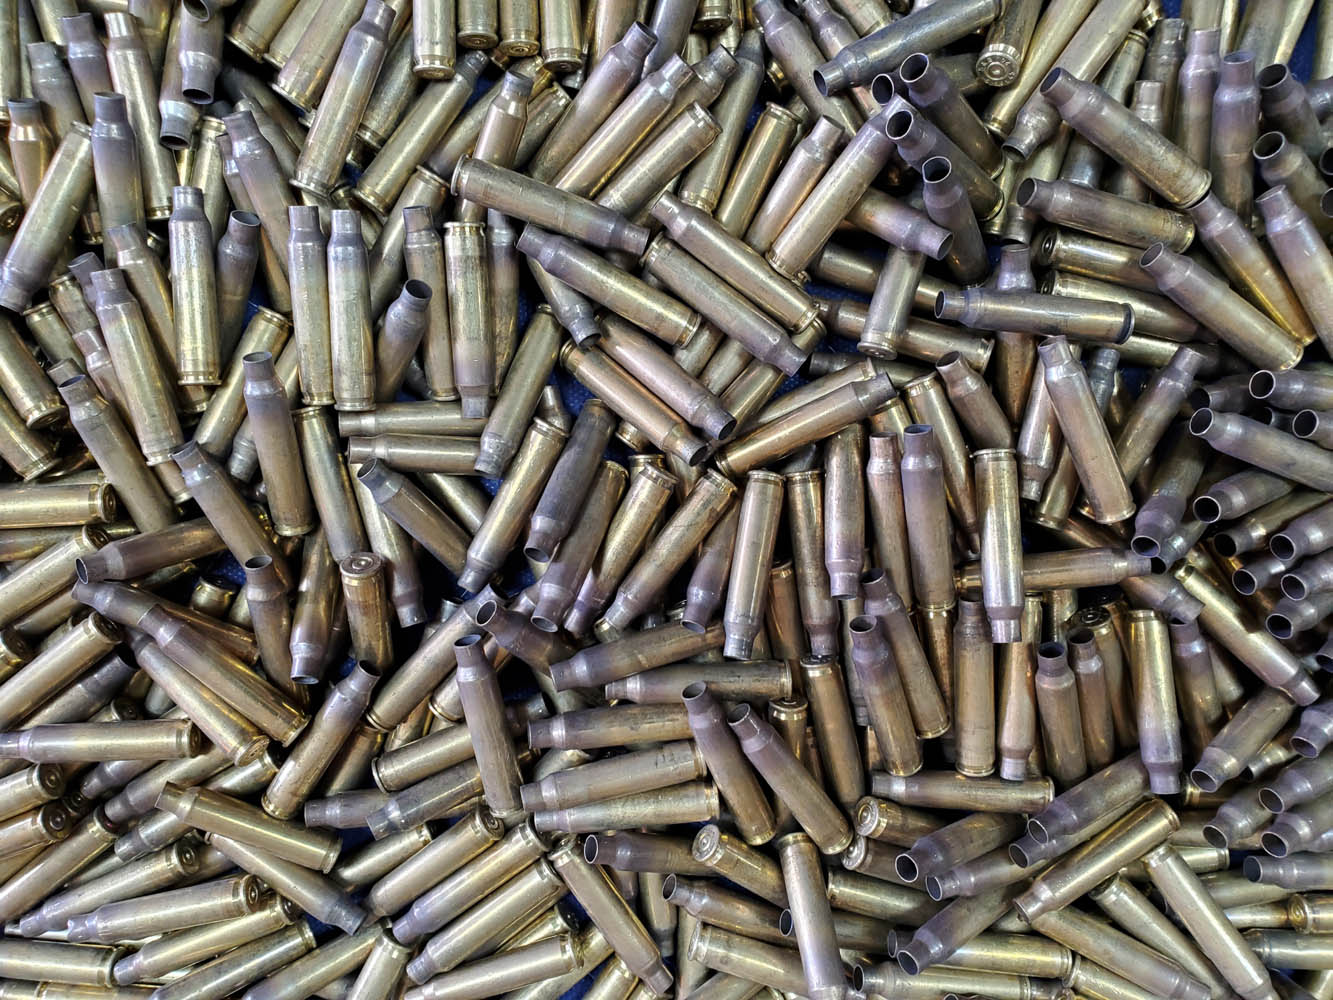 223/556 Once Fired Brass Shell Casings Not Cleaned - Once Fired